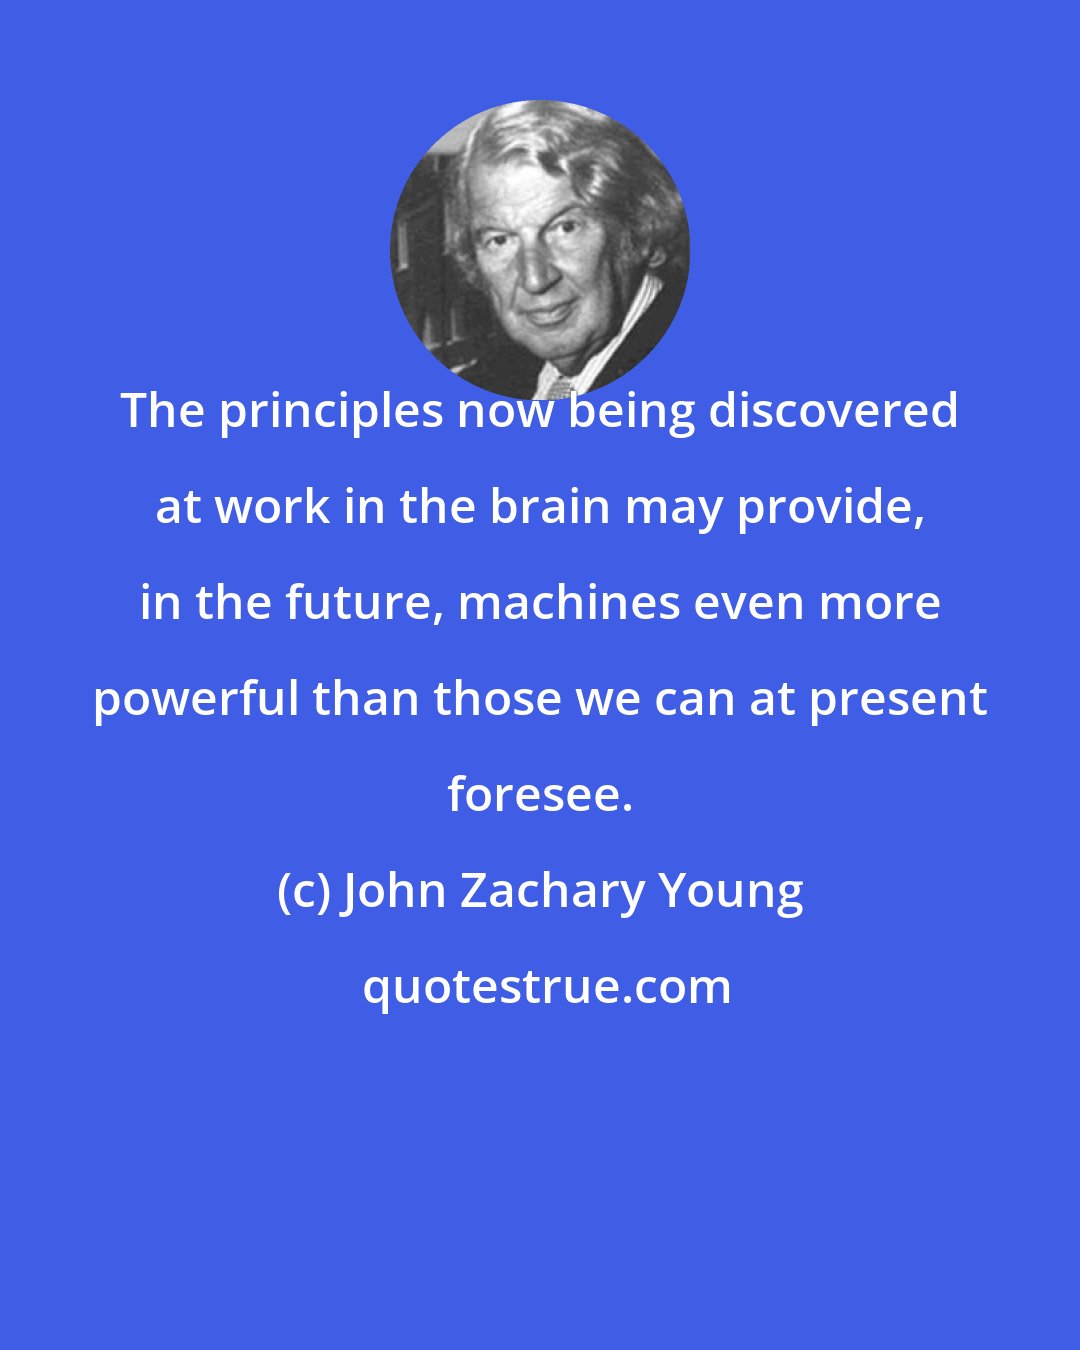 John Zachary Young: The principles now being discovered at work in the brain may provide, in the future, machines even more powerful than those we can at present foresee.